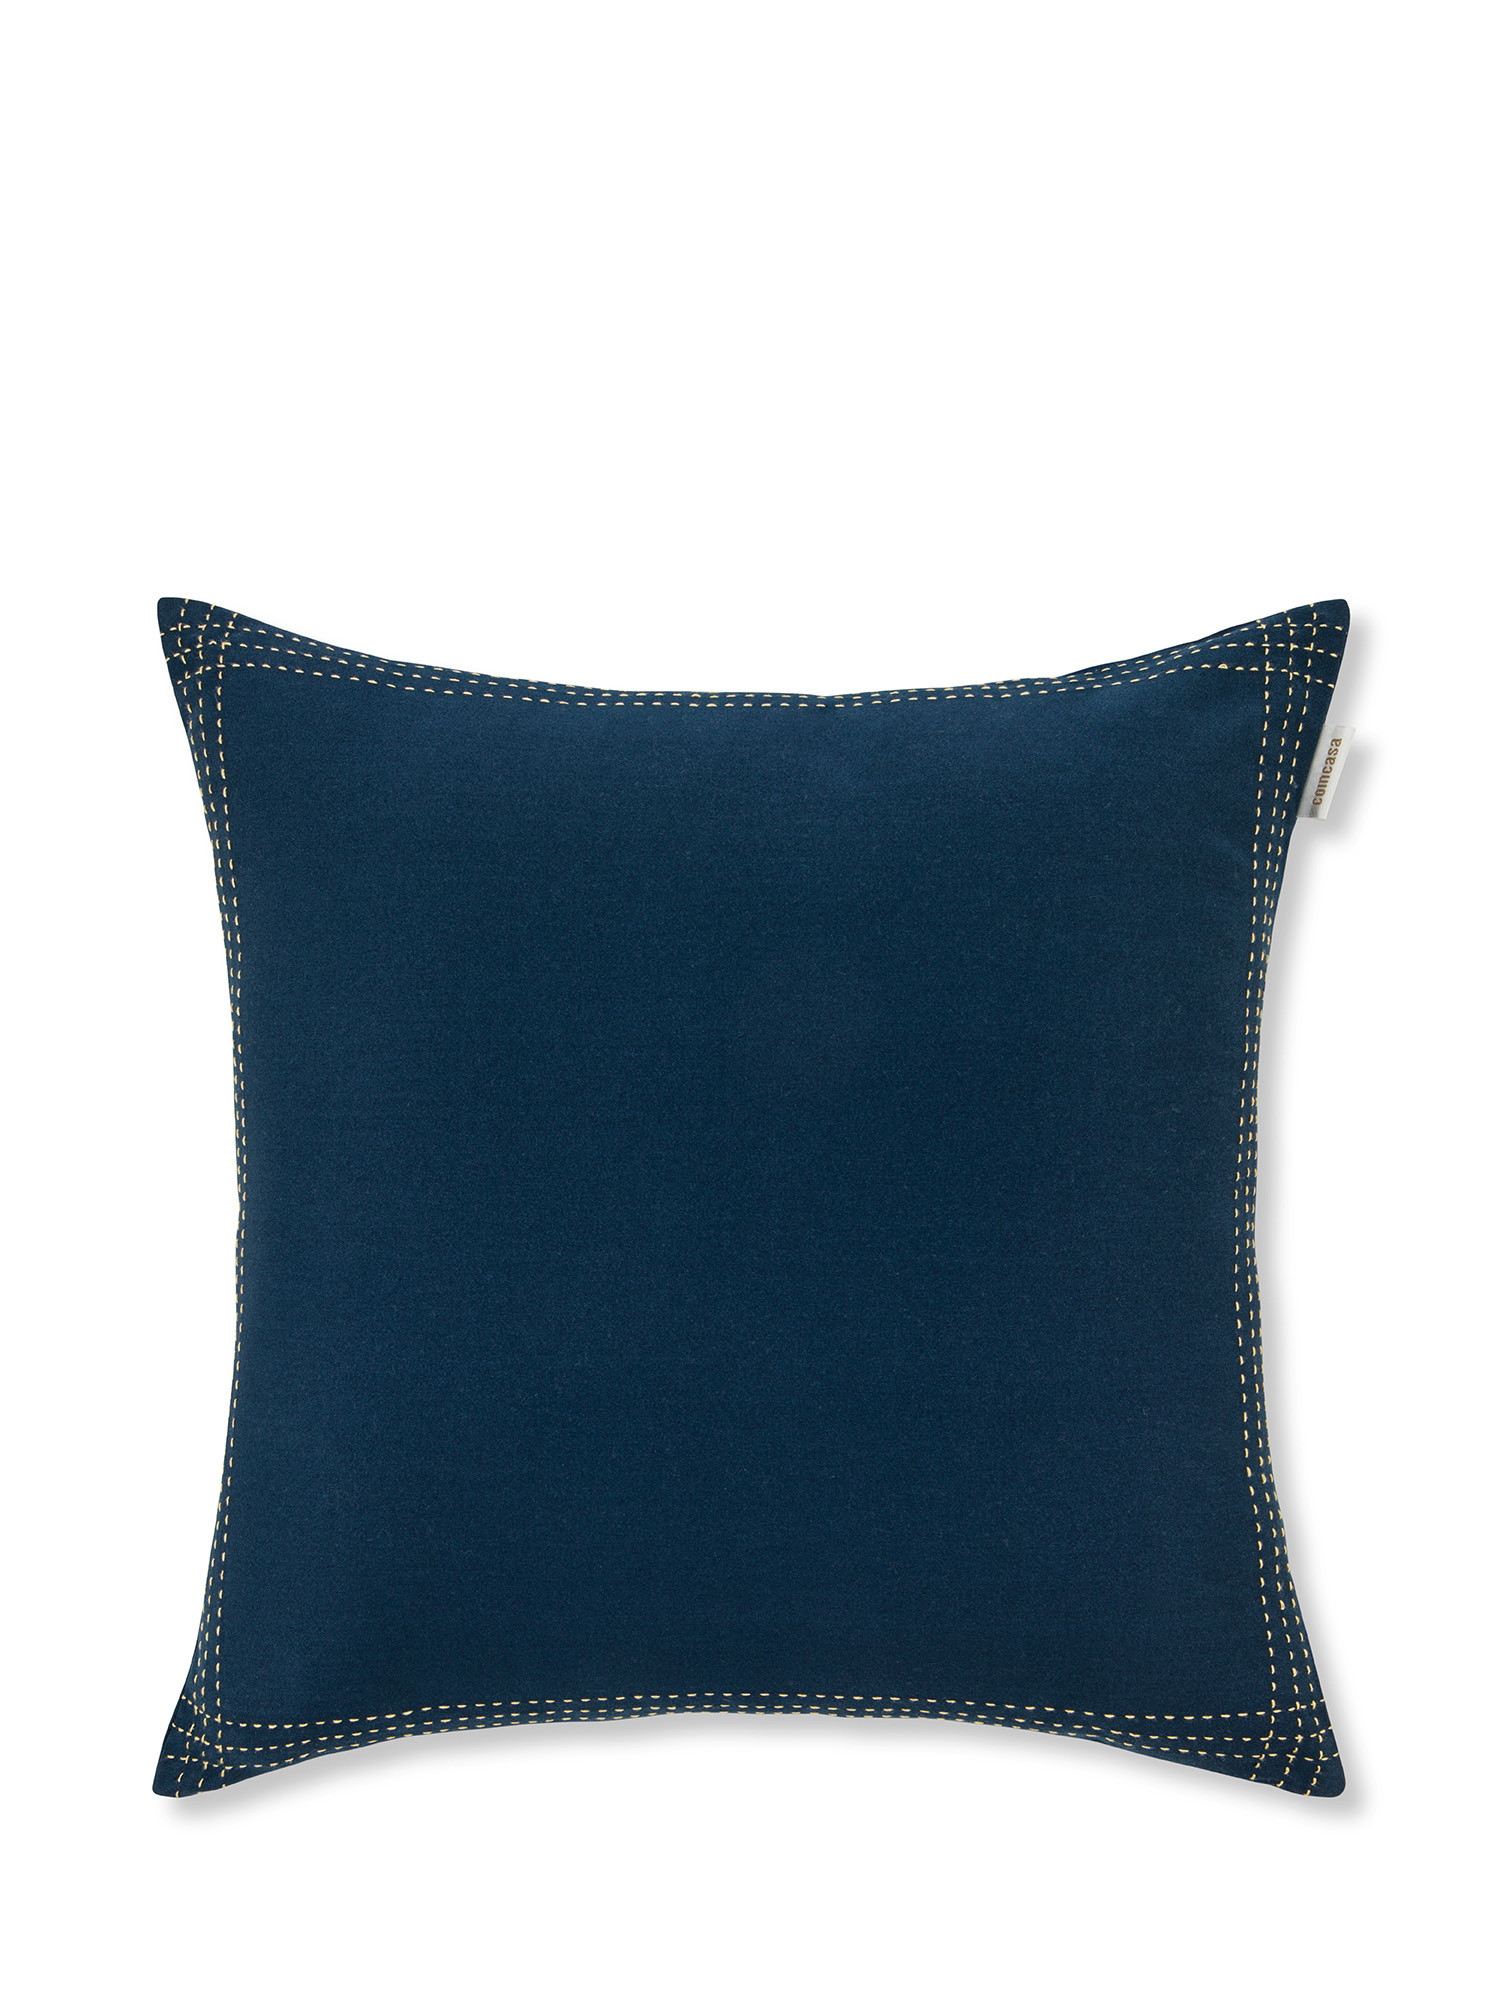 Cotton twill cushion with stitching 45x45cm, Dark Blue, large image number 0